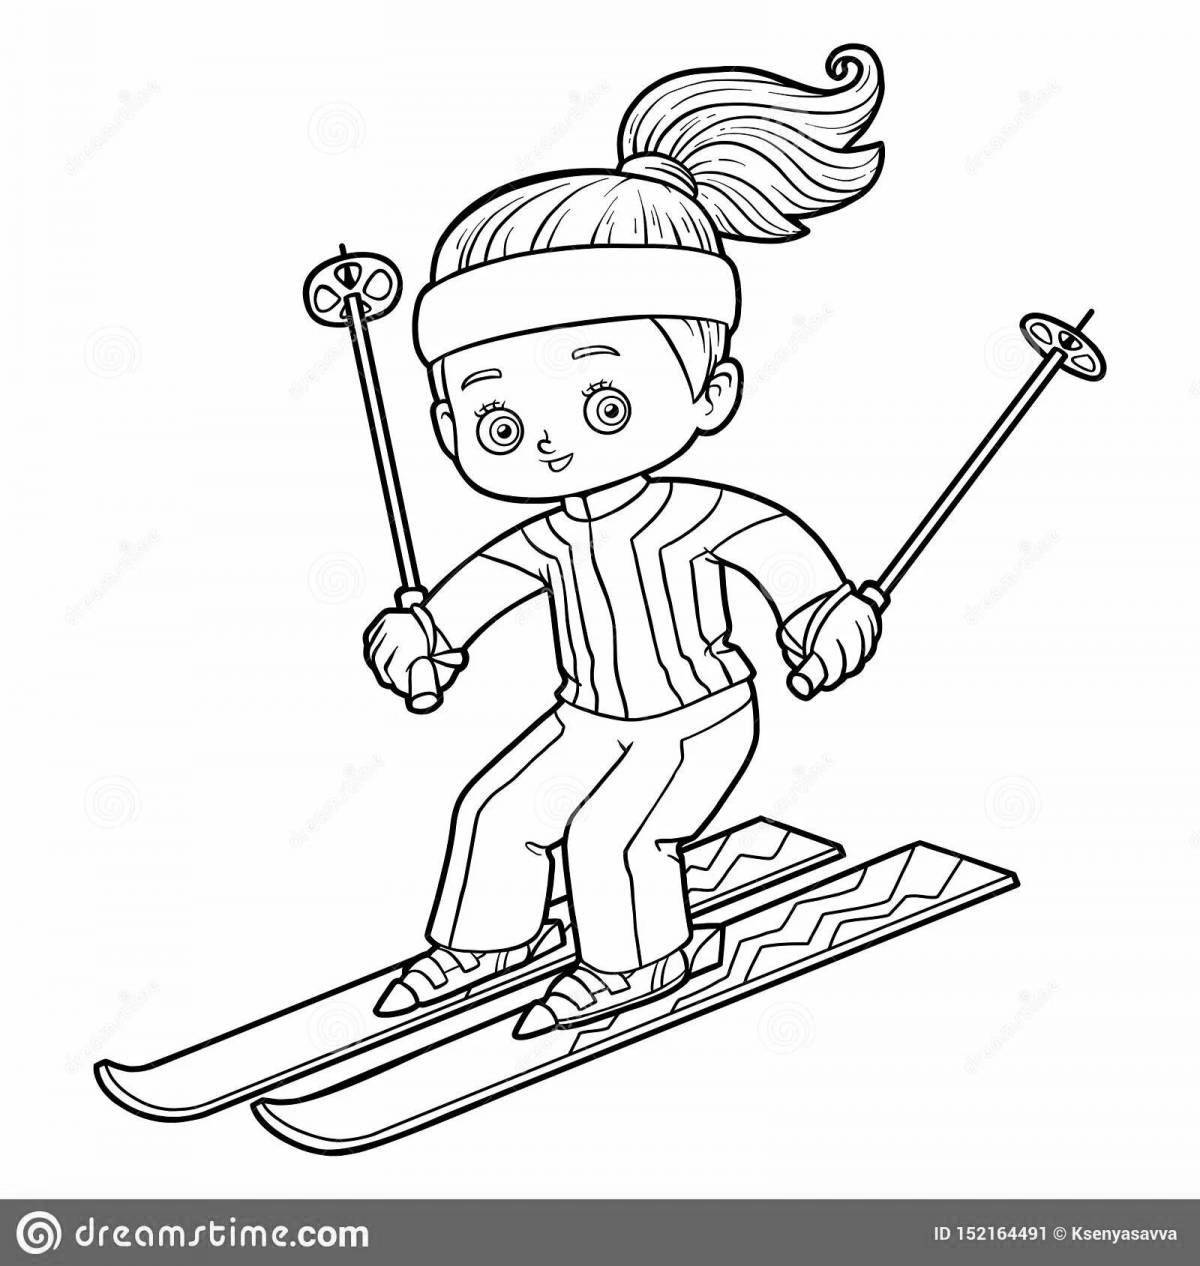 Snow skiing coloring page